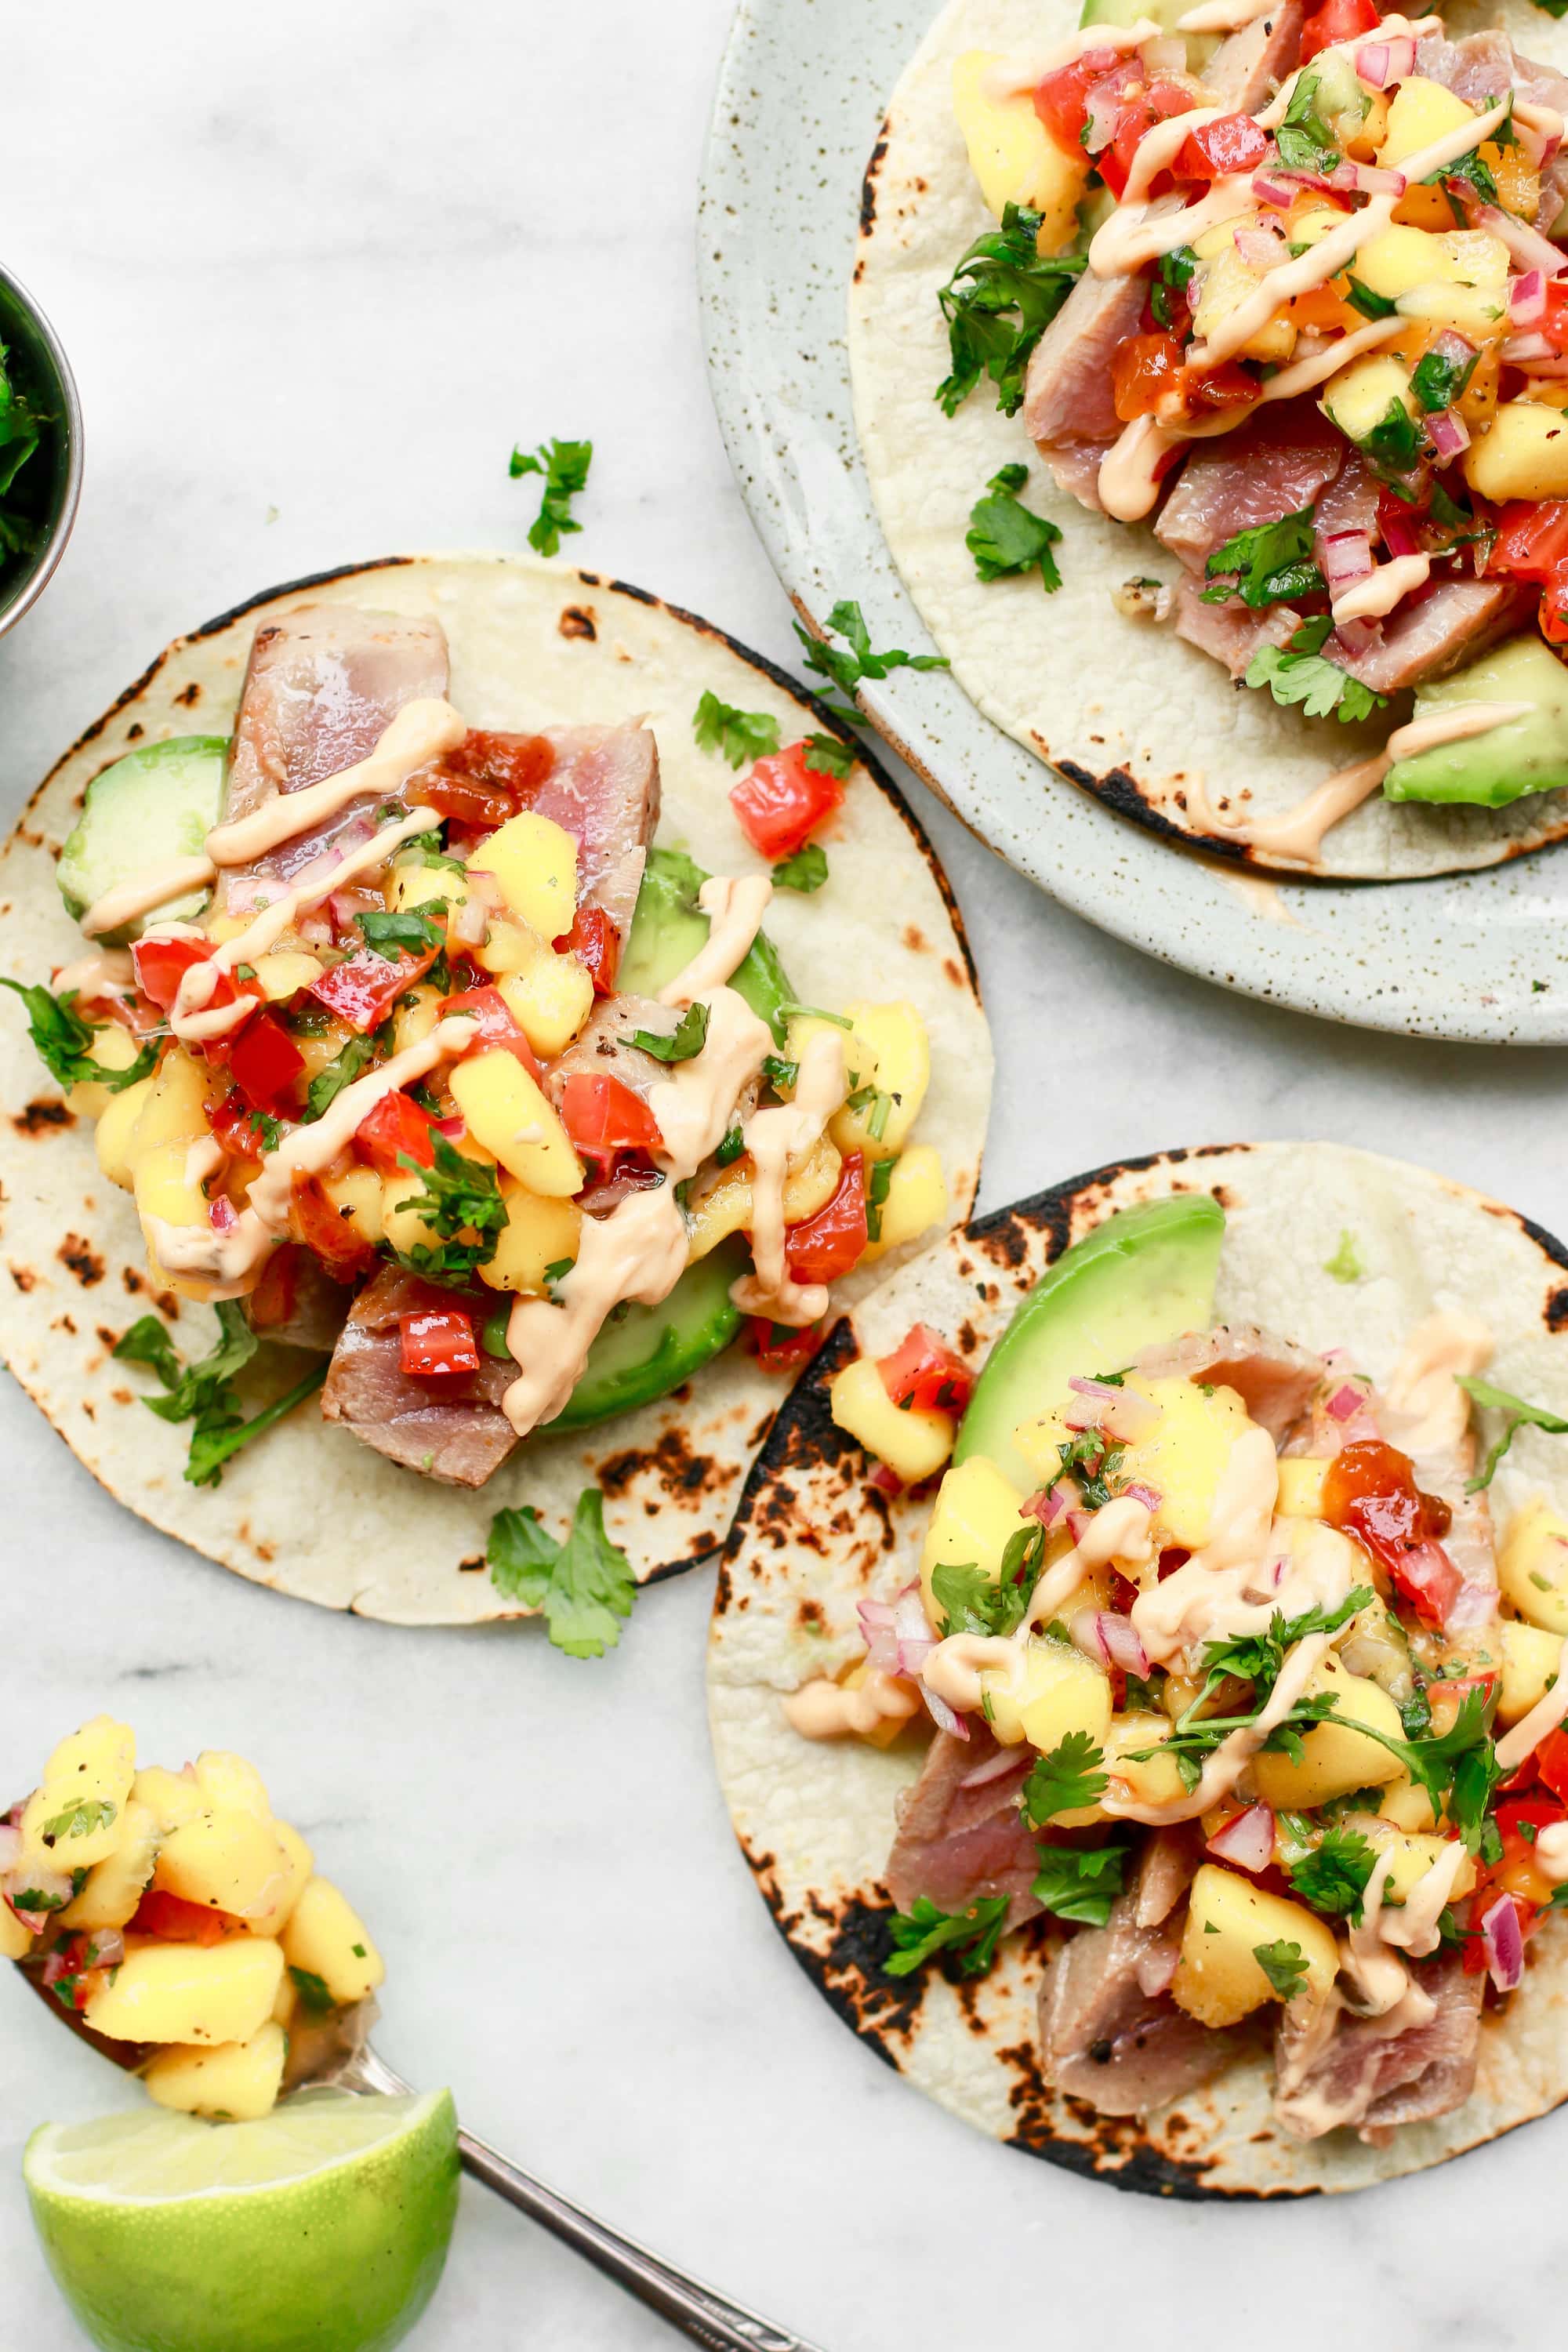 ahi fish tacos with mango salsa on toasted tortillas